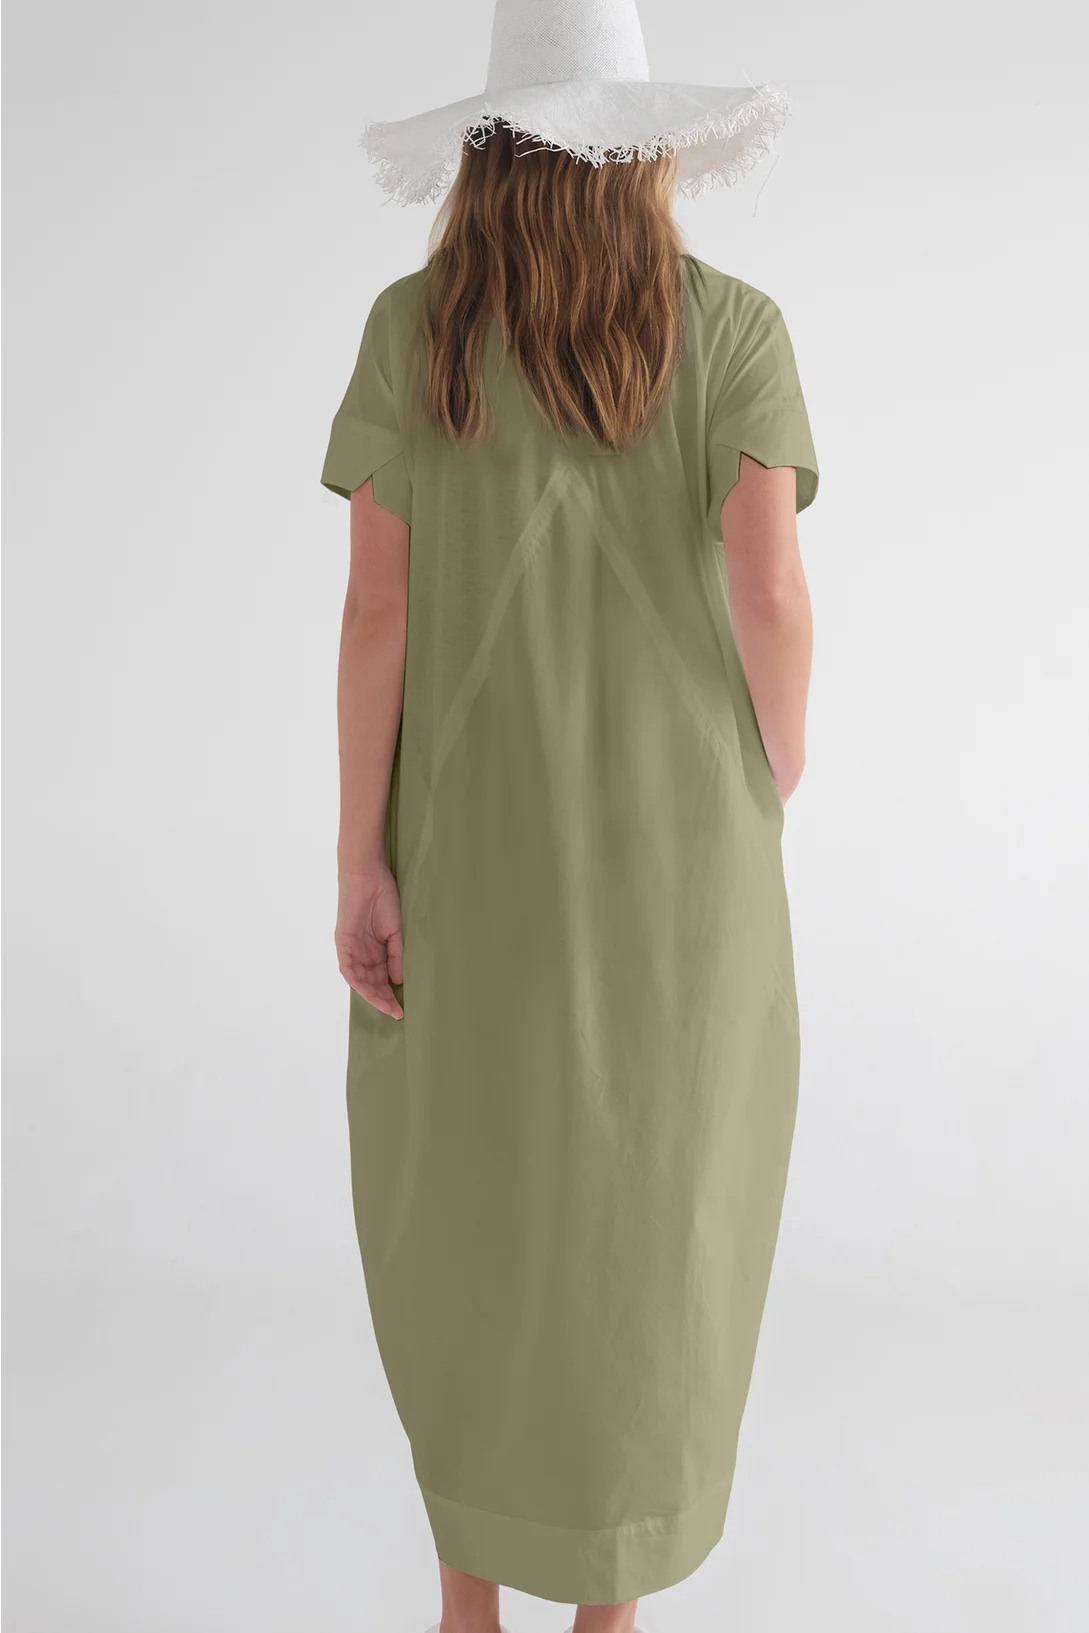 Taylor Transection Dress - Sage